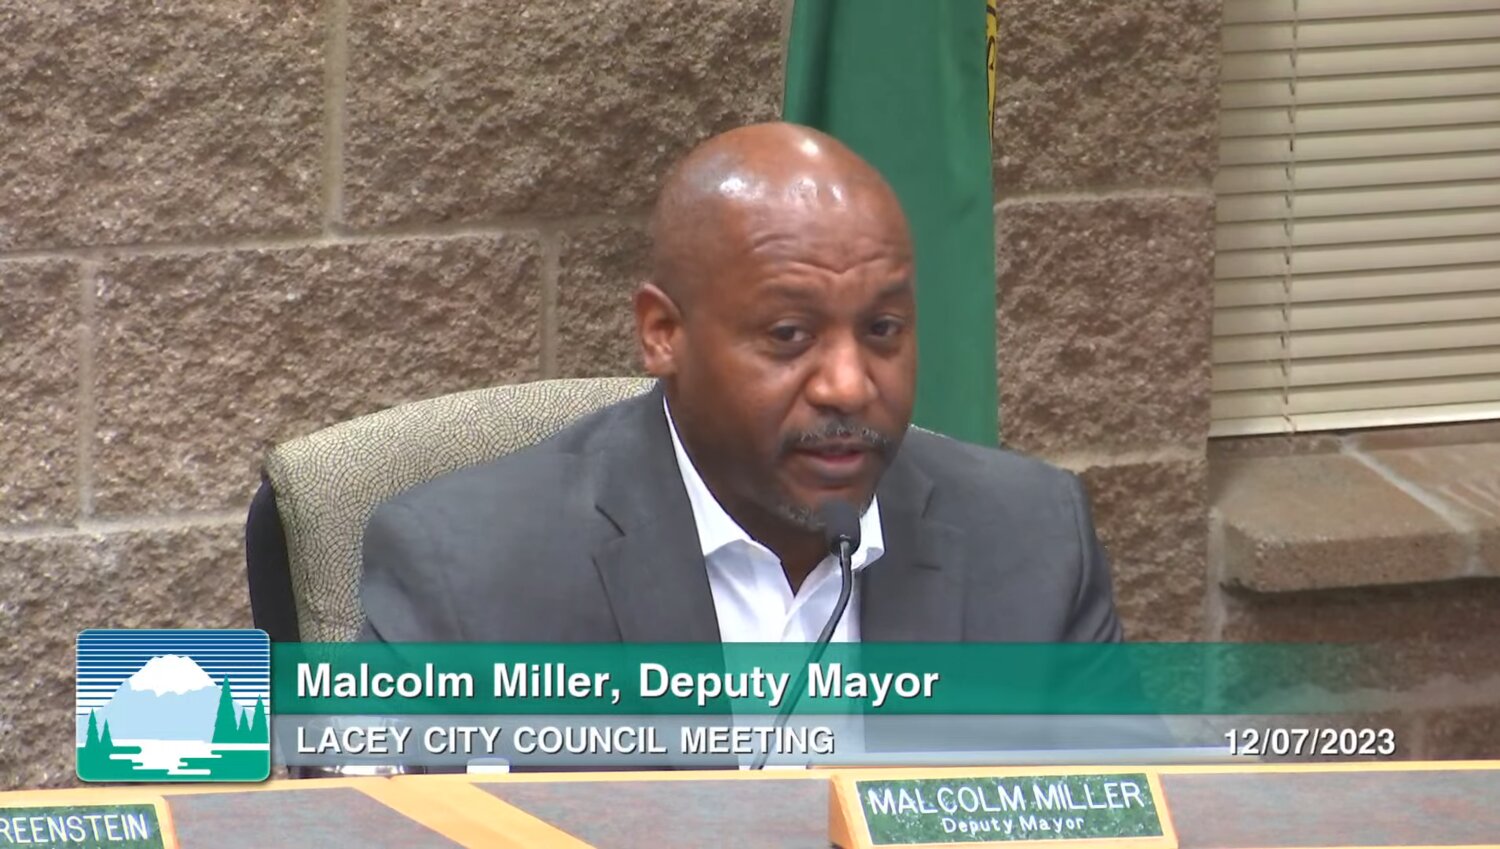 Deputy Mayor Malcolm Miller sees the Franz Anderson project as a "win" in battling the homelessness problem in Lacey.